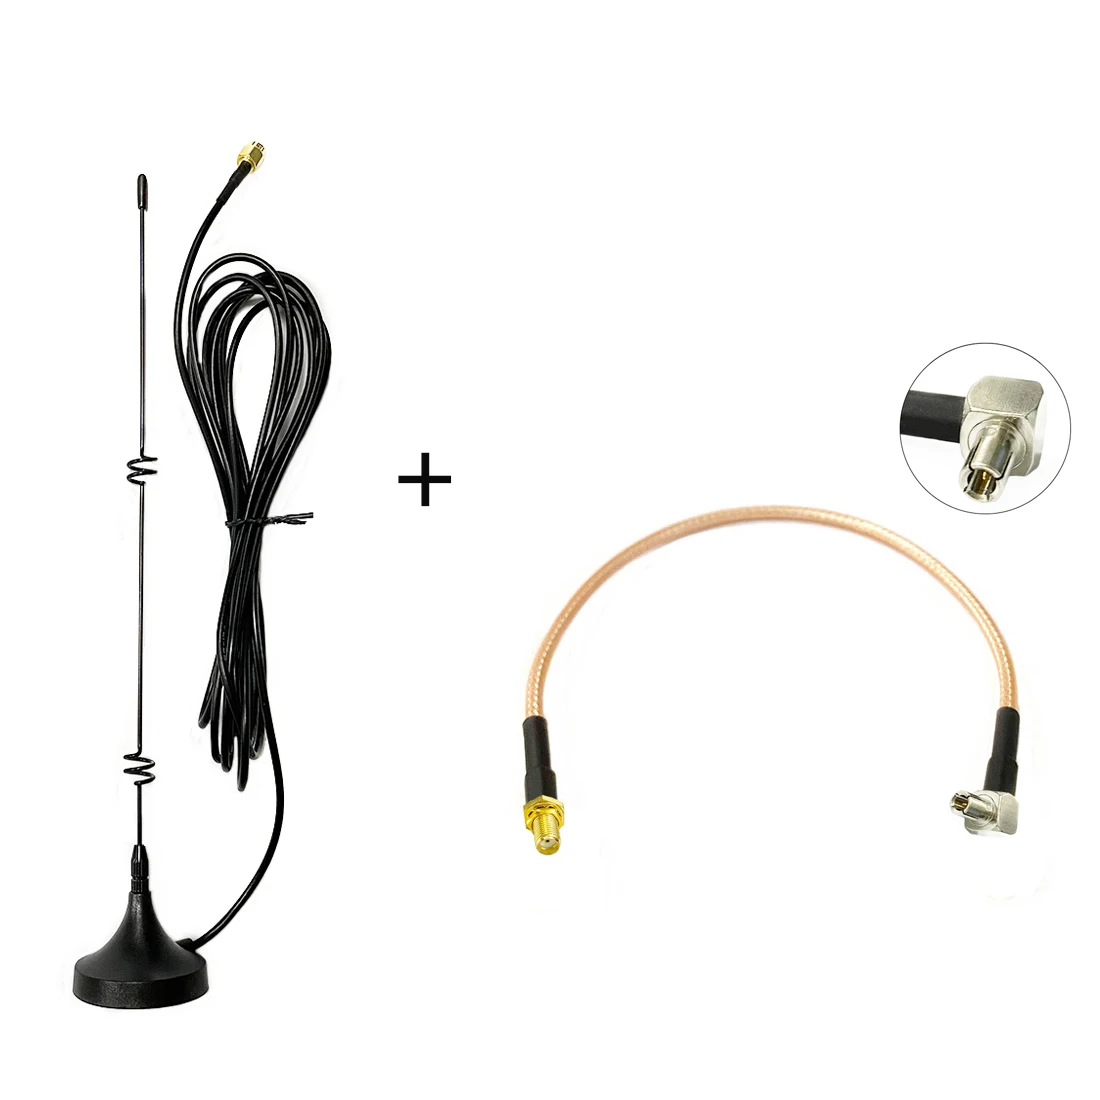 2 4ghz 5ghz 5 8ghz dual band 6dbi wifi antenna connector for mini pci card camera usb adapter wireless network router 4G 3G GSM Antenna 6dbi High Gain Magnetic Base with 3meters Cable SMA Male +SMA Female Connector  to TS9 Male RG316 Cable 15cm